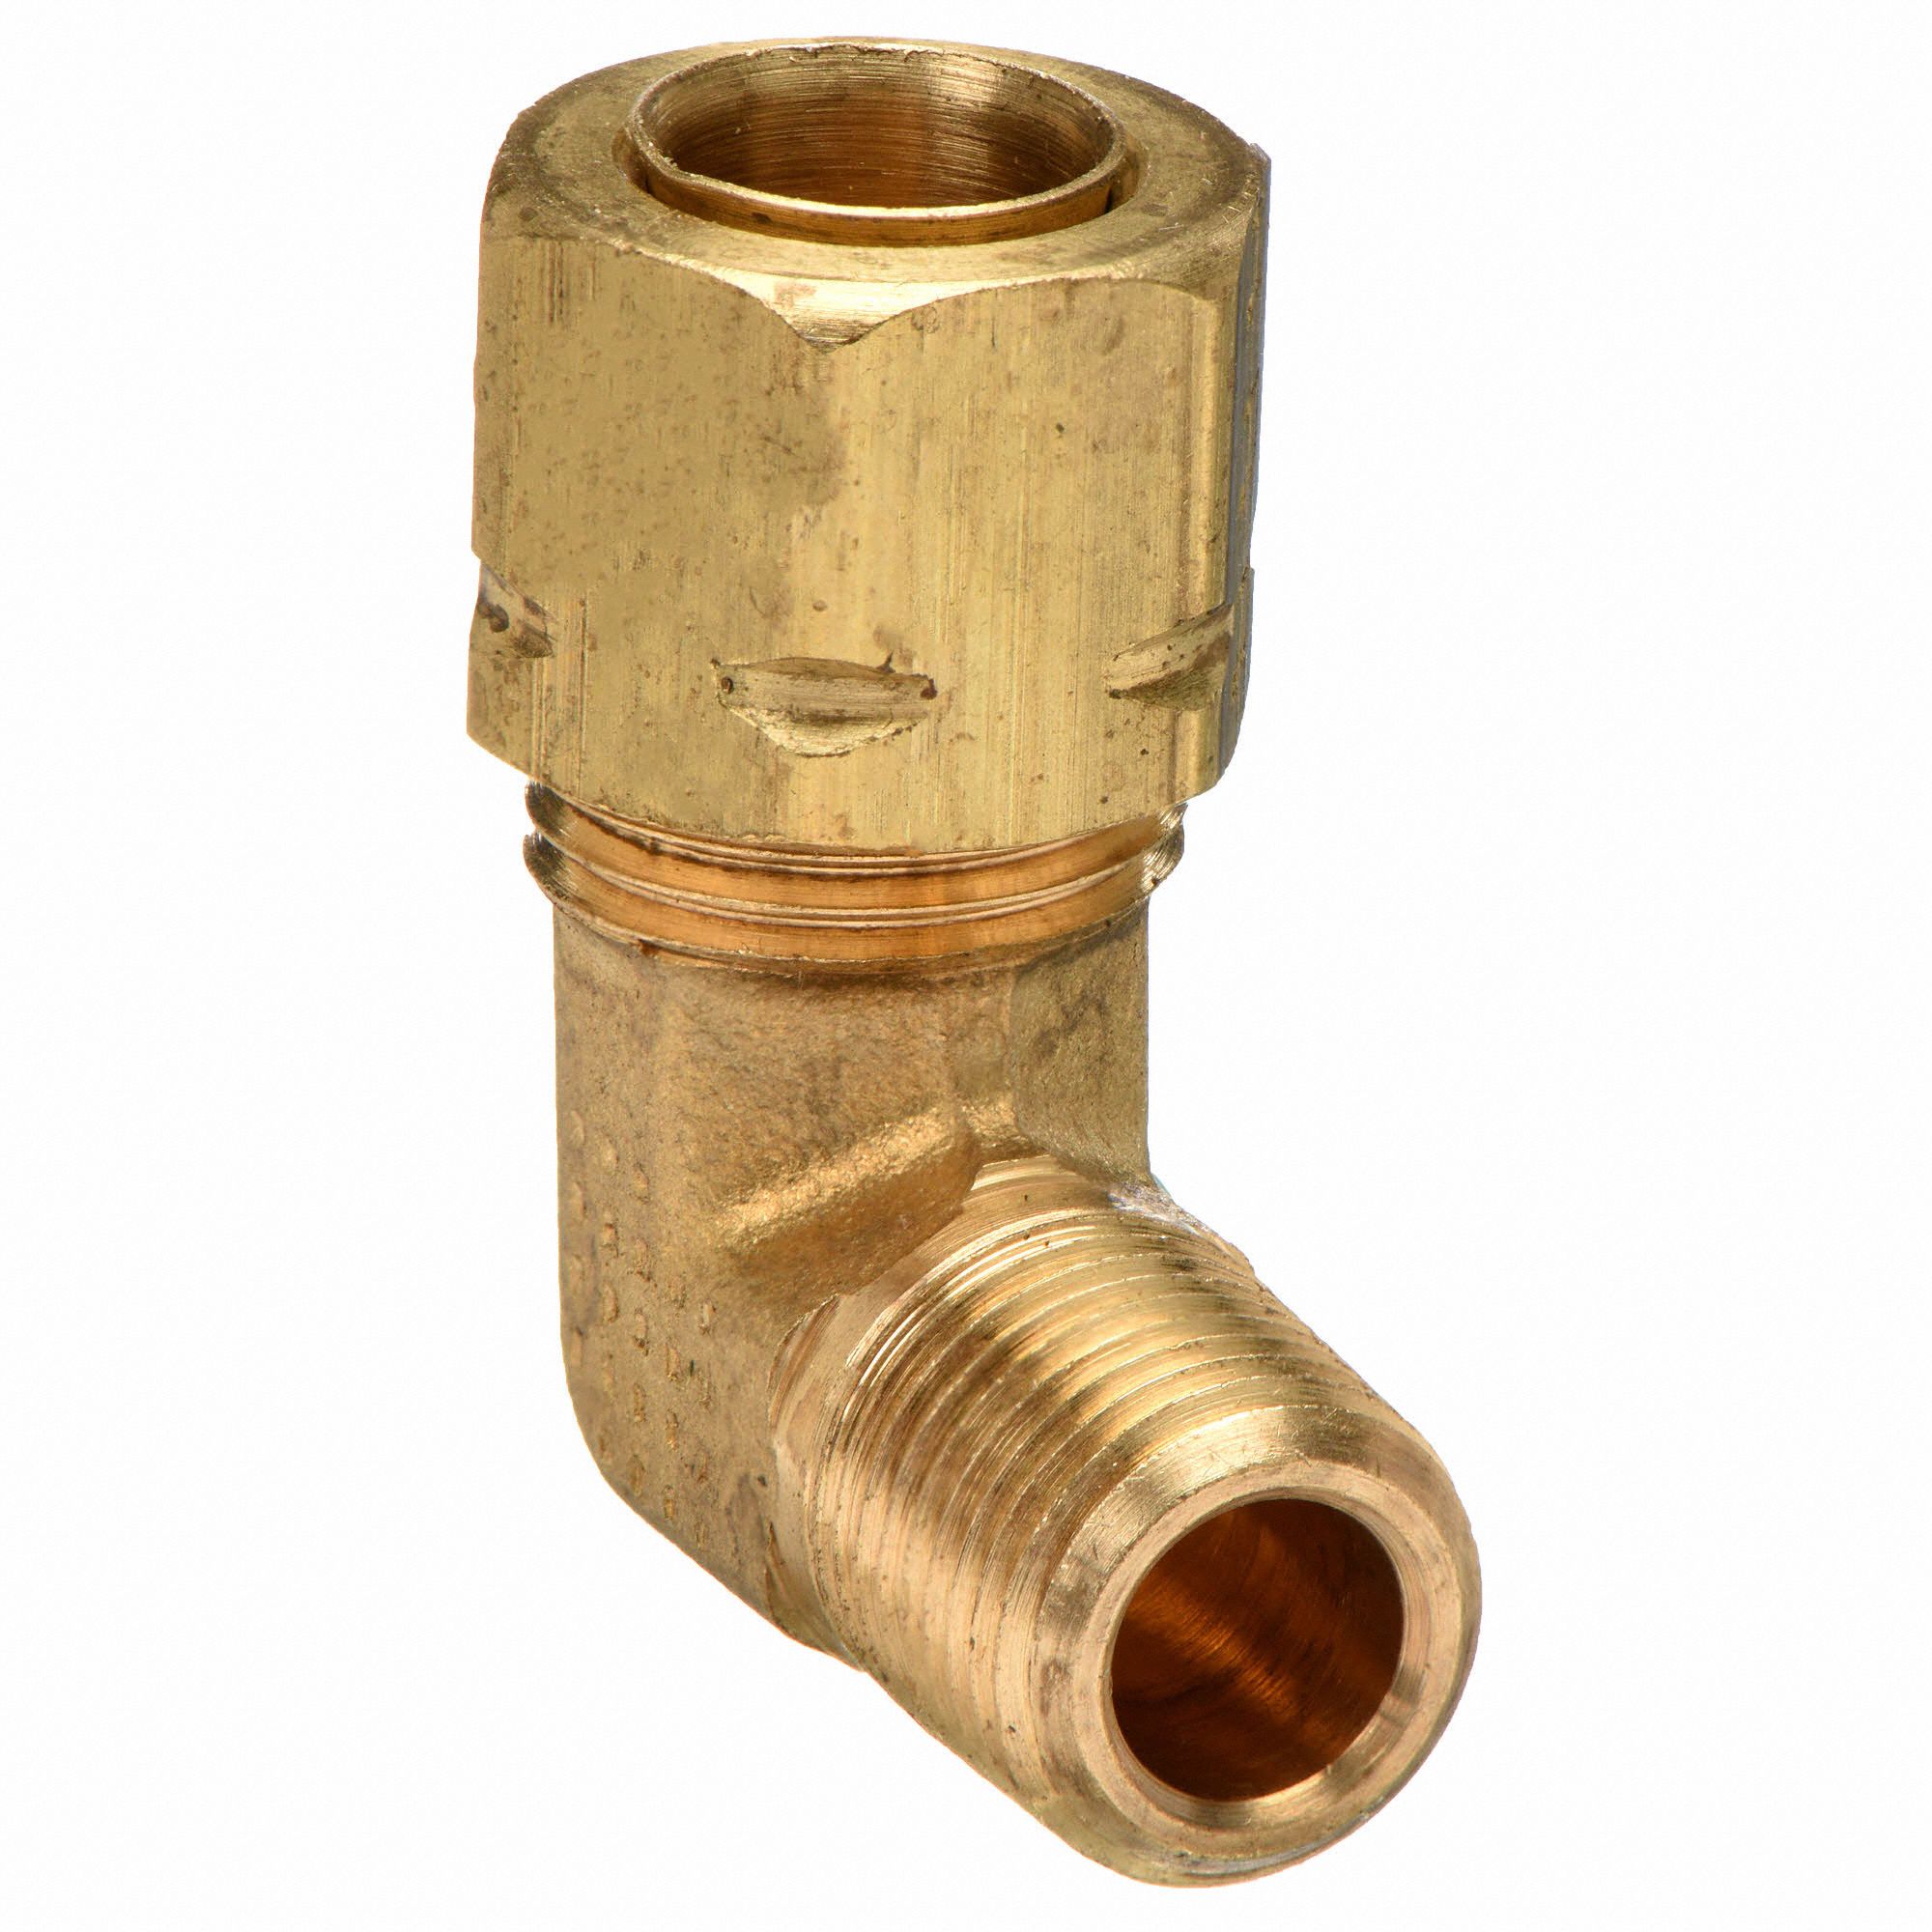 PARKER 1/4" OD TUBE COMPRESION X 3/8" NPT BRASS MALE 90° ELBOW NNB 